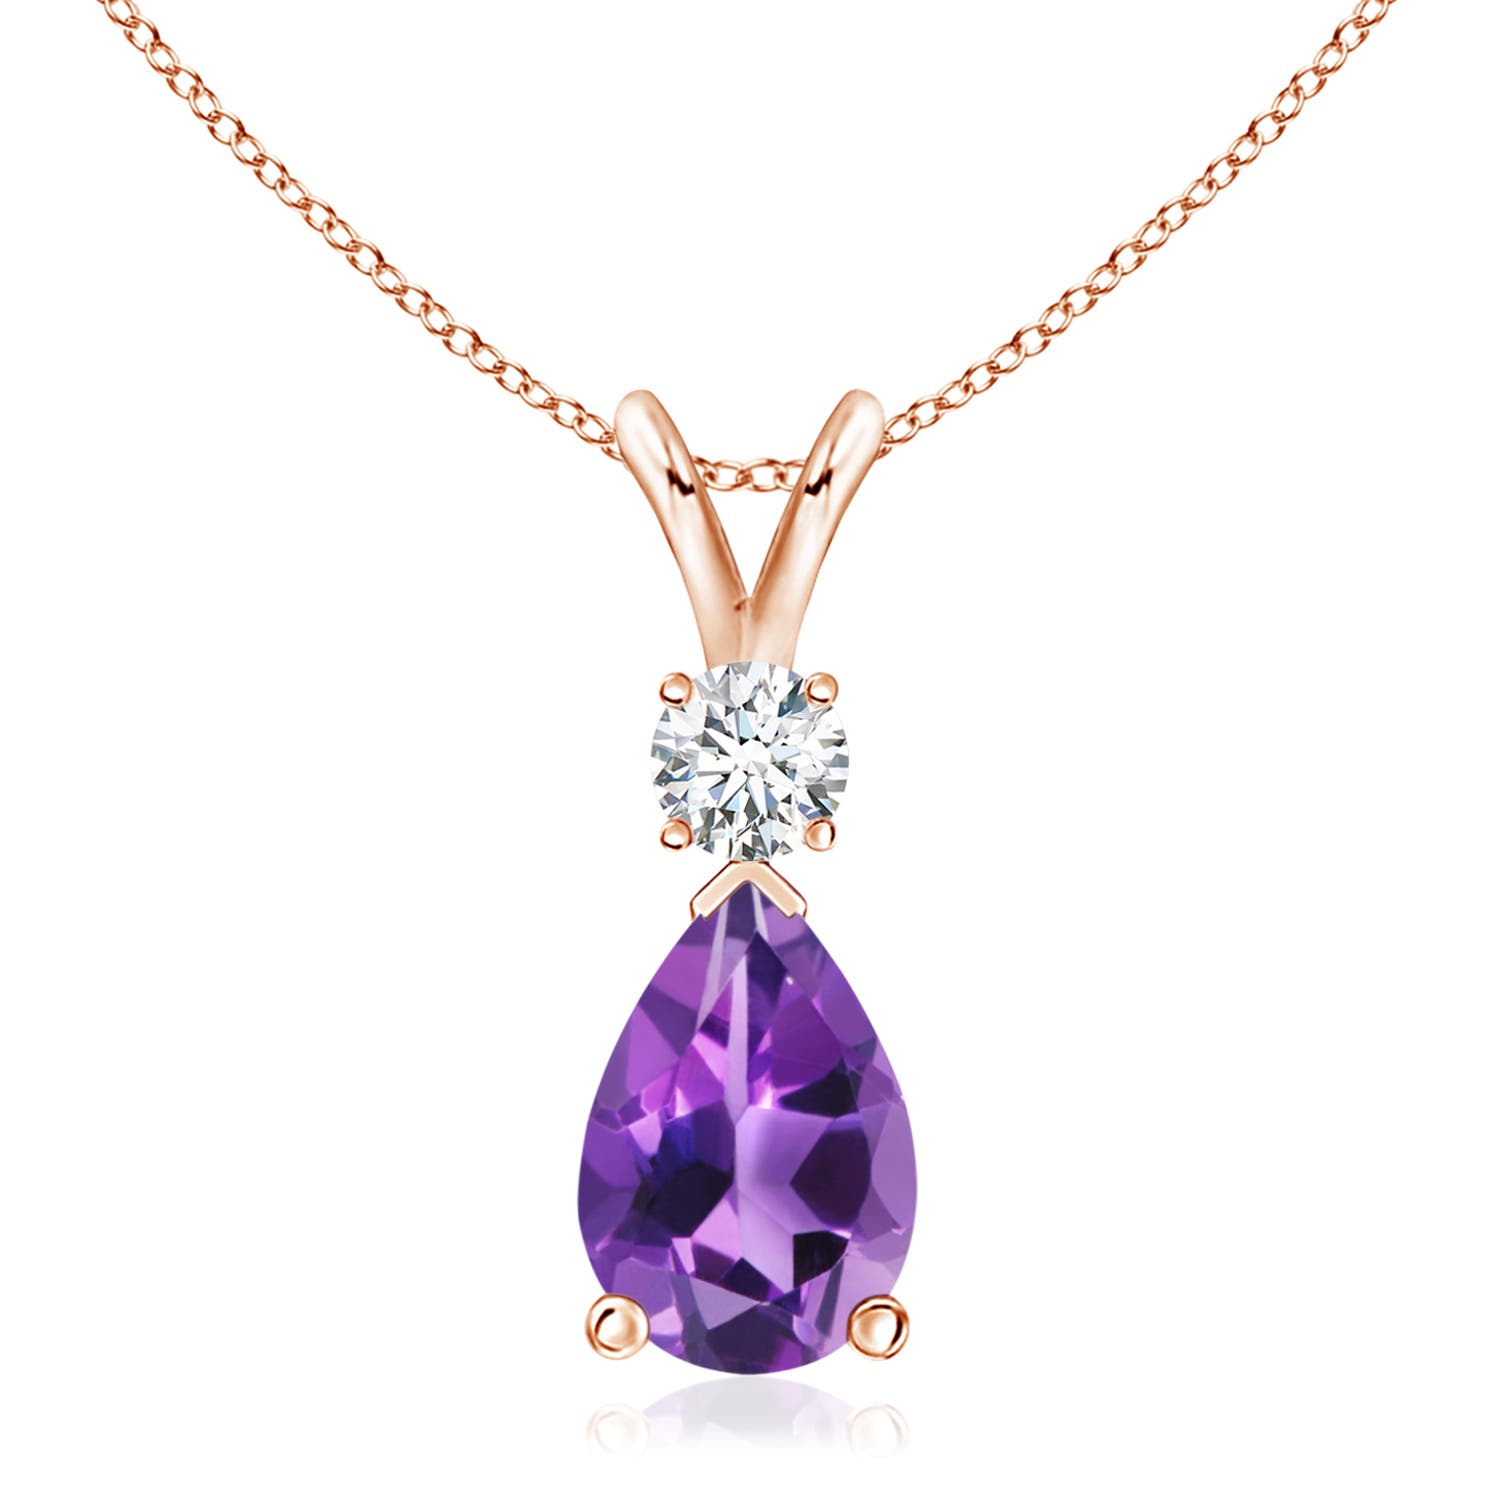 AAA - Amethyst / 2.78 CT / 14 KT Rose Gold